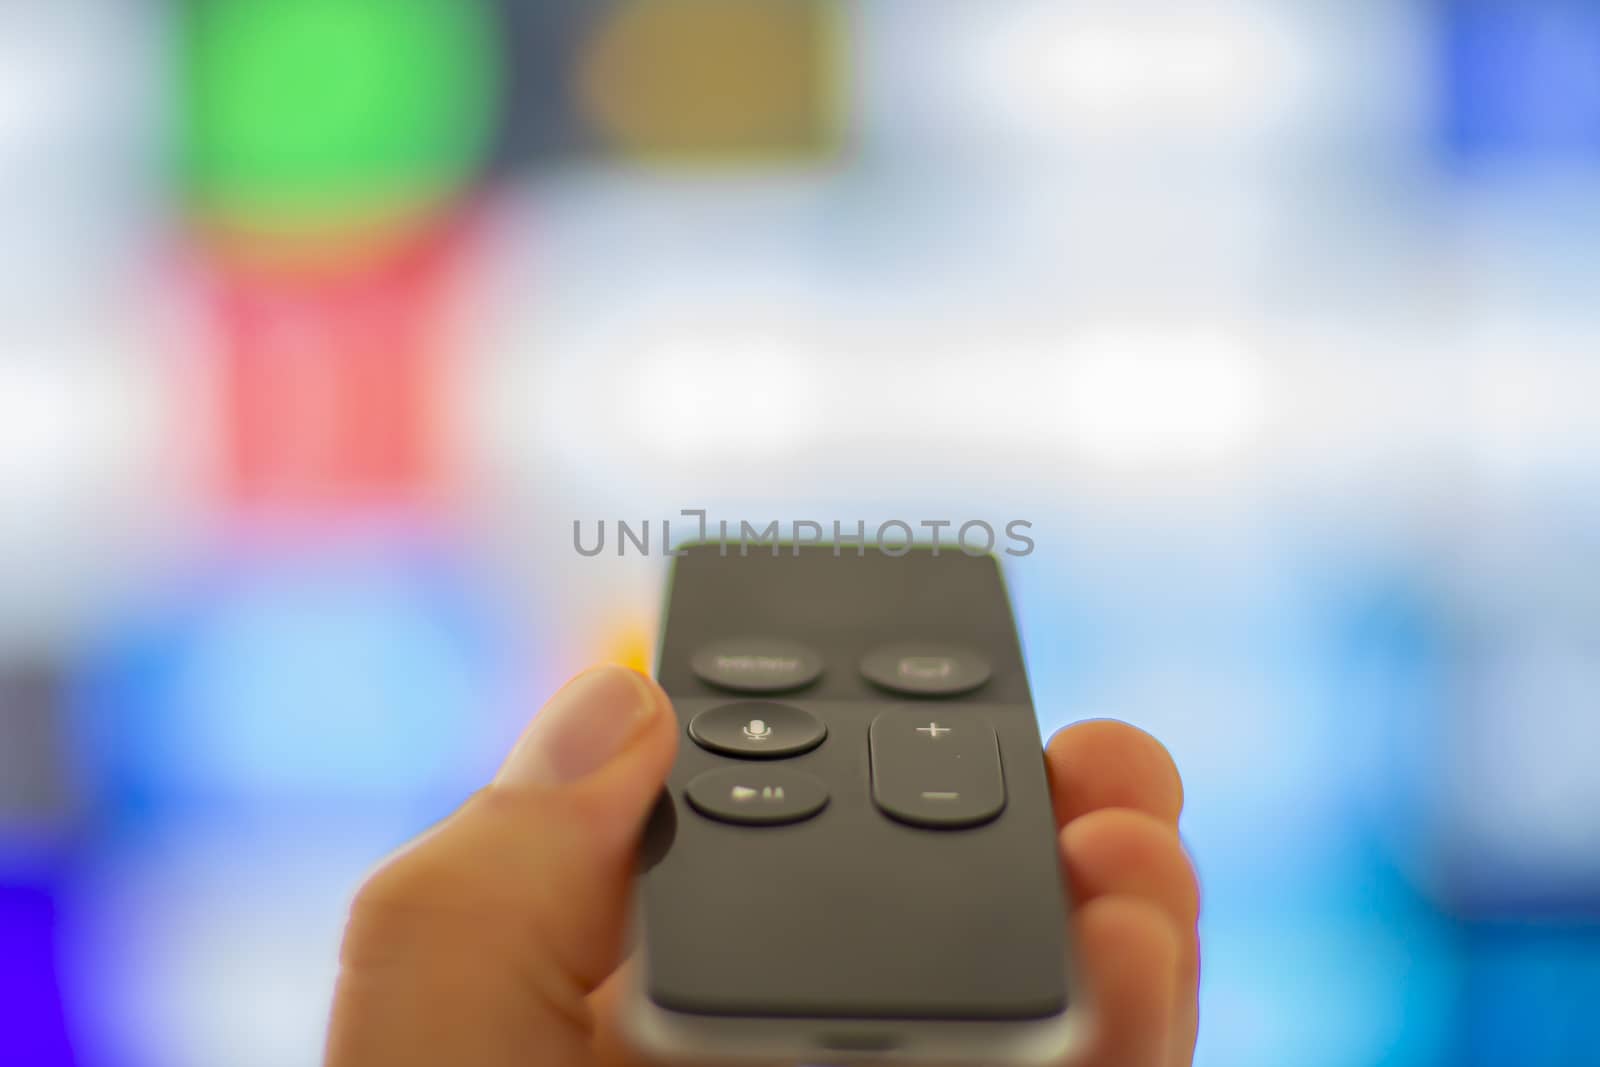 Close up of a person holding a digital media player and microconsole remote with a television screen on the background